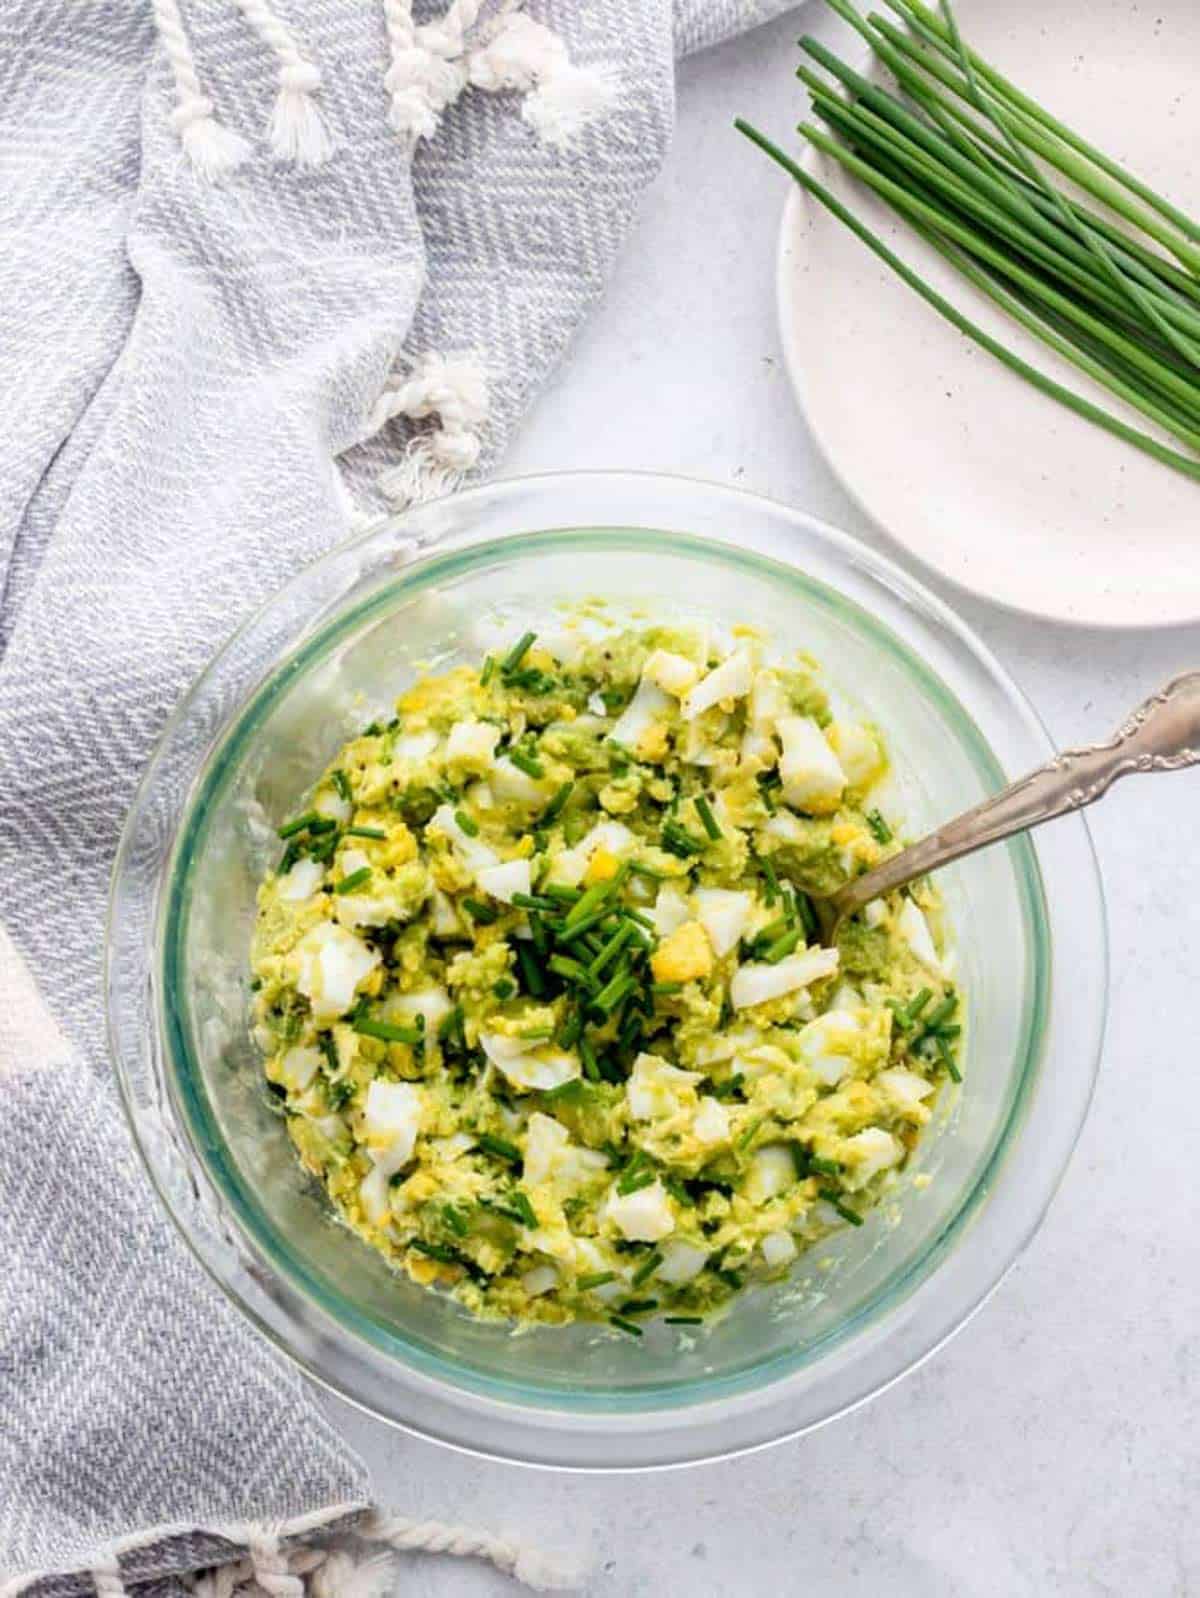 Low carb egg salad recipe mixed together in a bowl with a spoon.